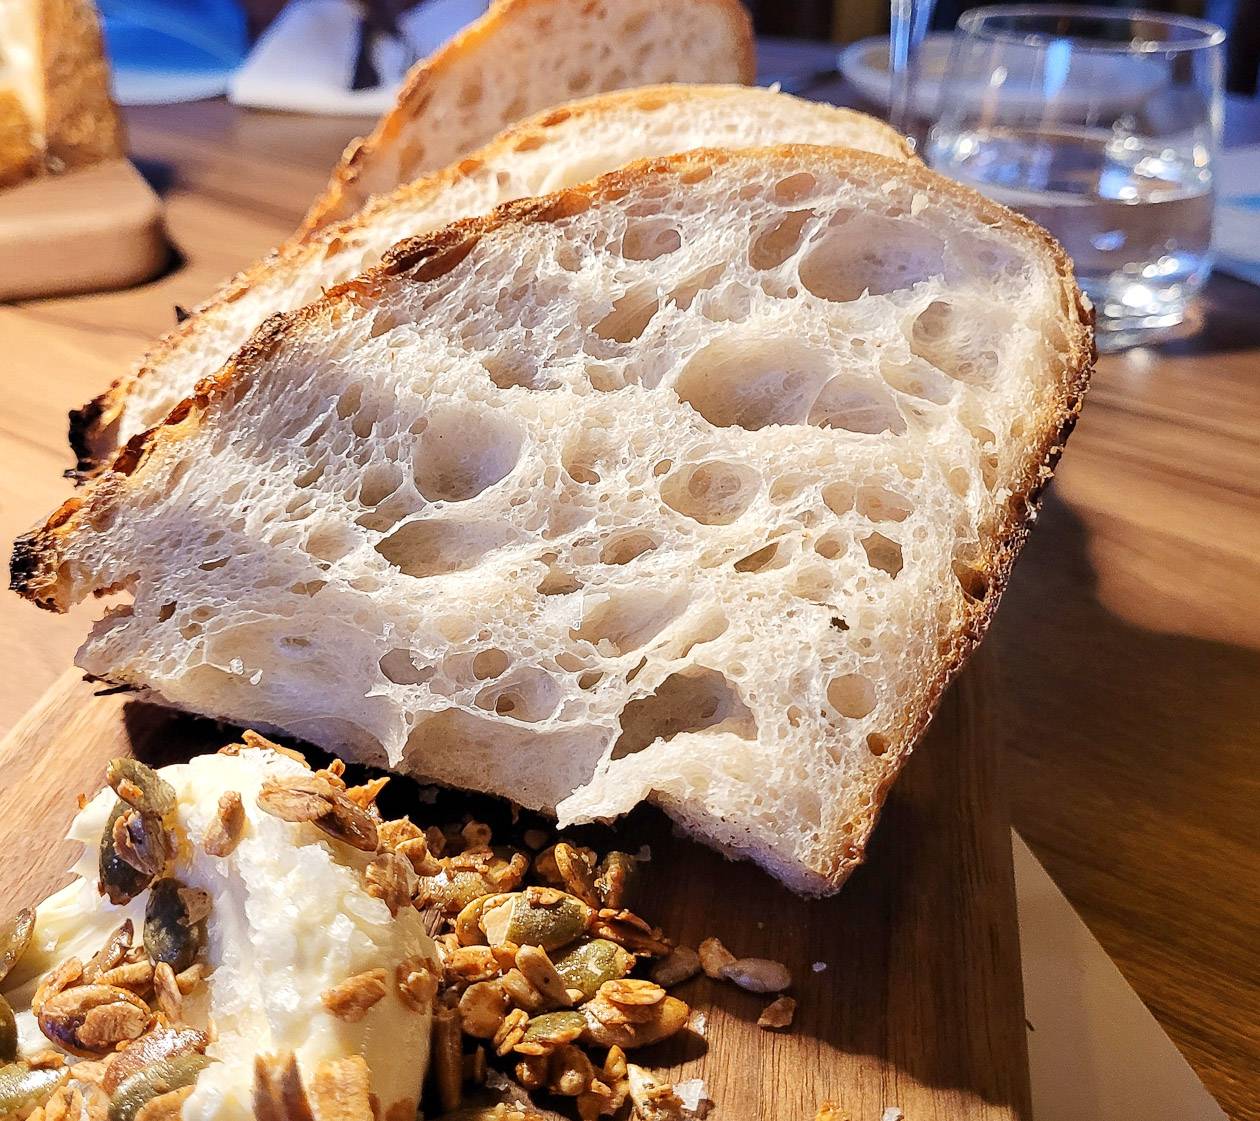 To die for Naramata apple sourdough bread with house cultured butter & Vancouver Island sea salt